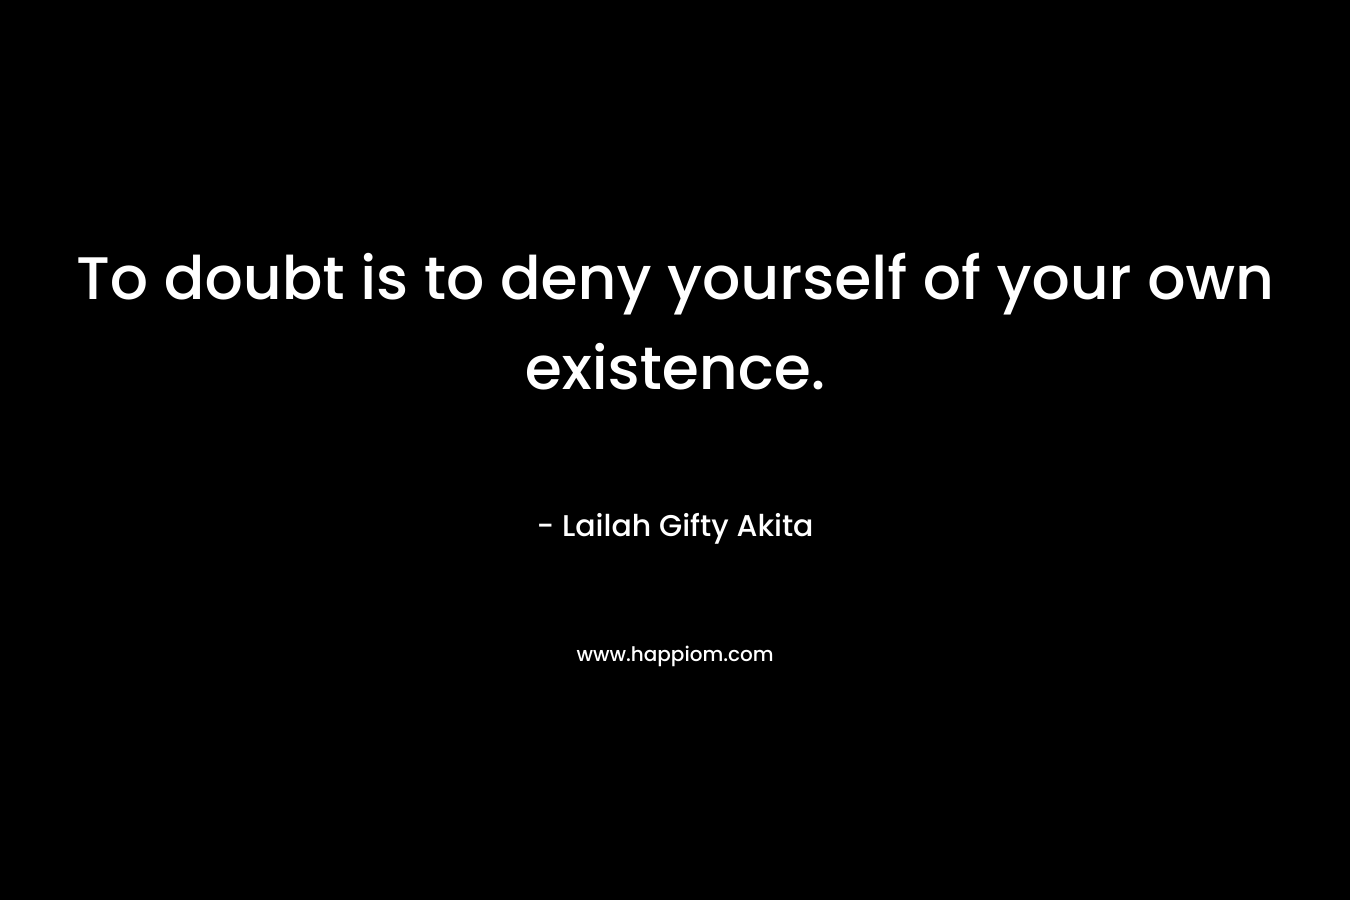 To doubt is to deny yourself of your own existence.